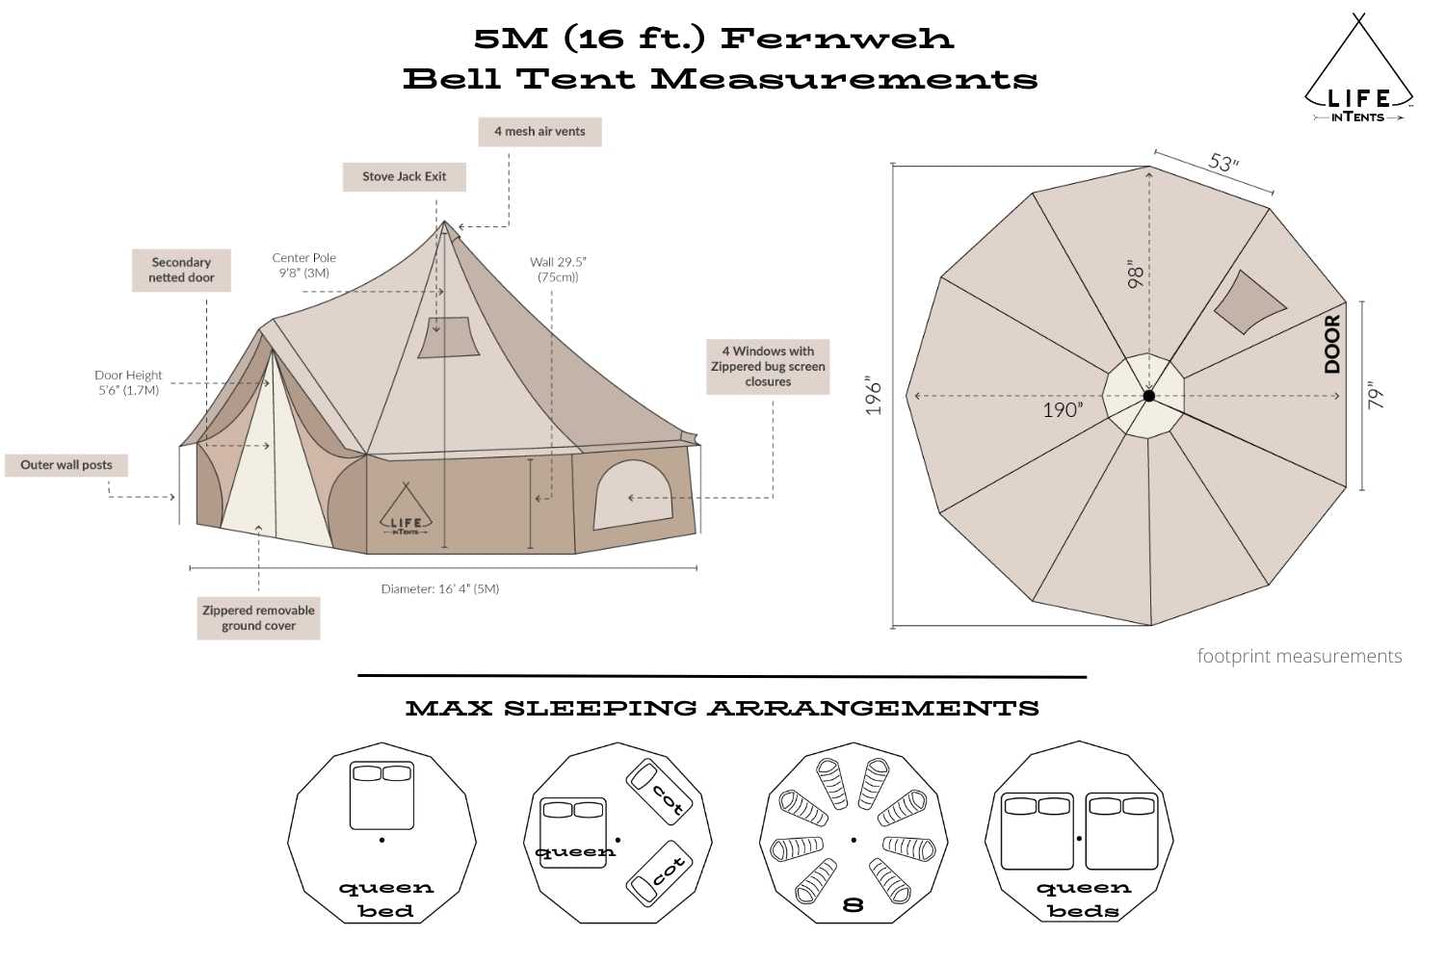 Life inTents Canvas Tent Life inTents Fernweh™ 360 View Canvas Bell Tent 16' (5 Meters)